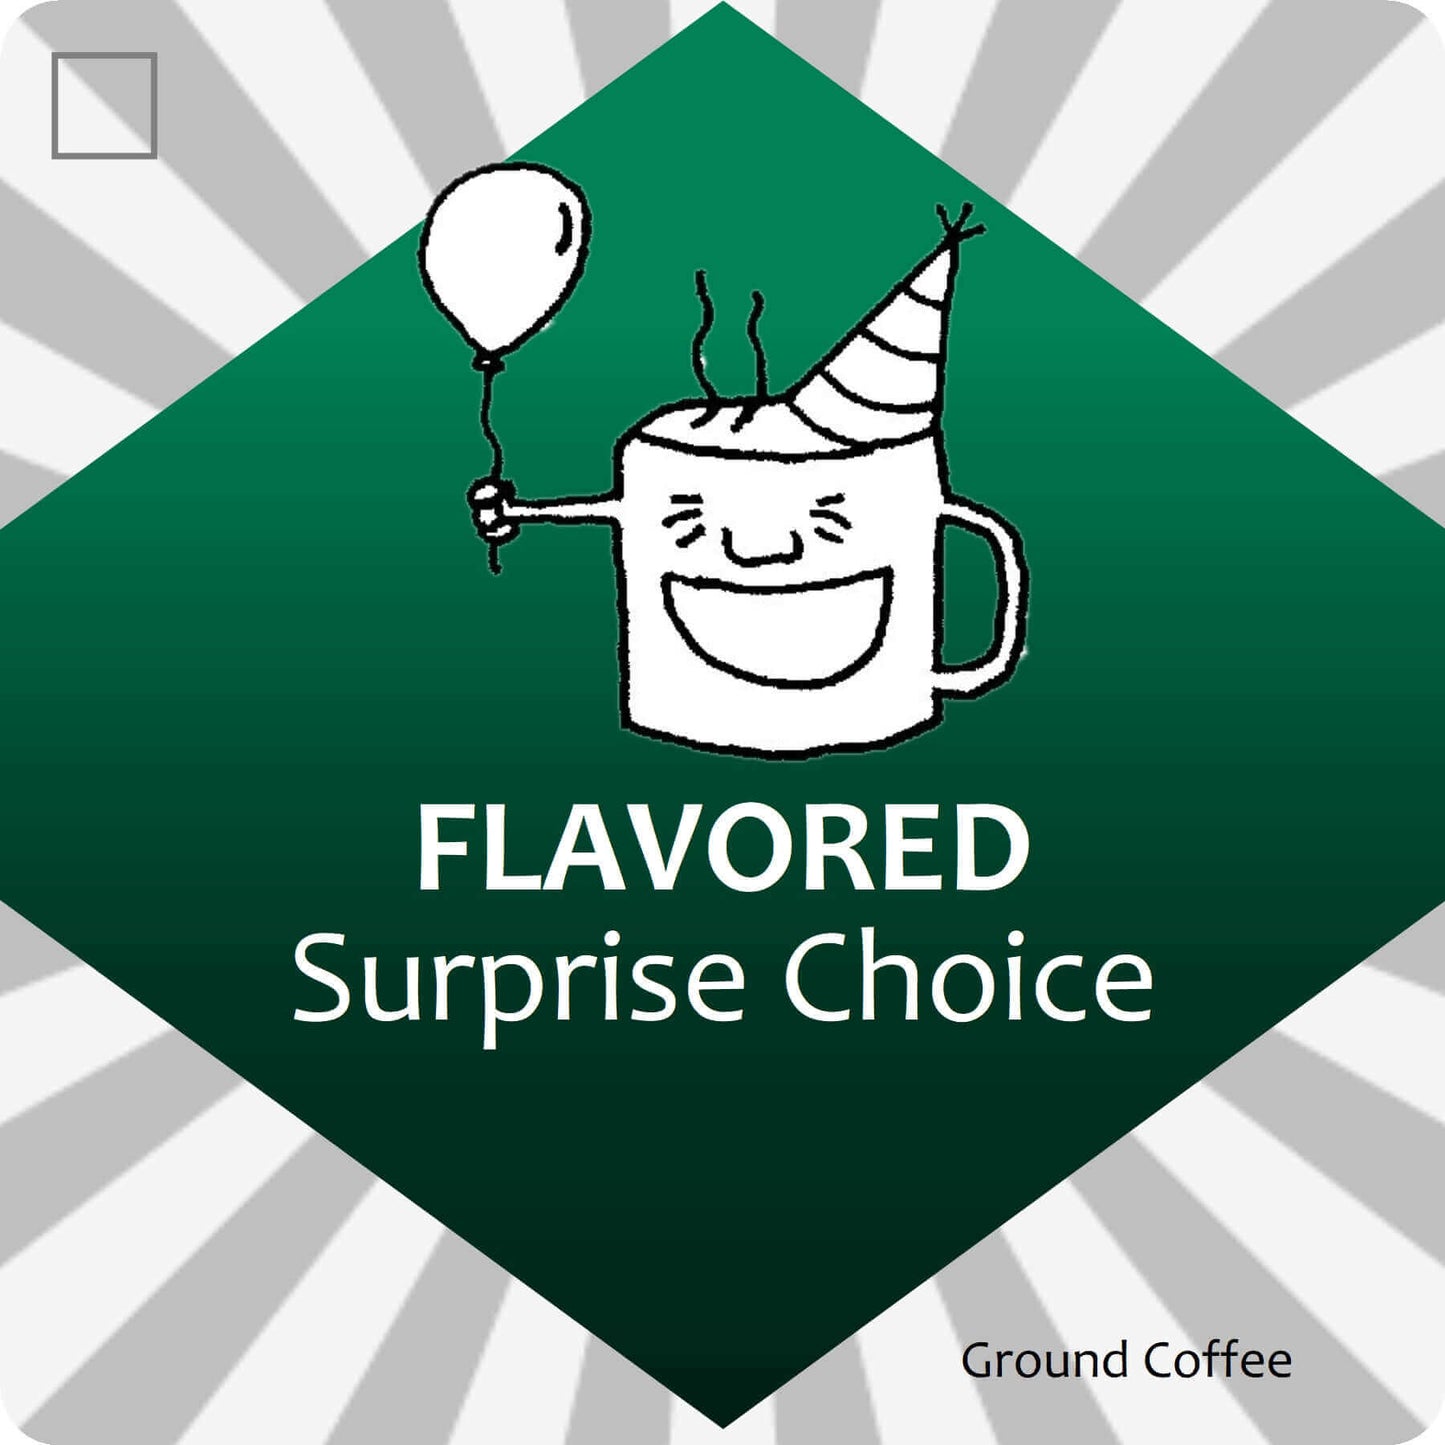 Flavored Surprise Choice